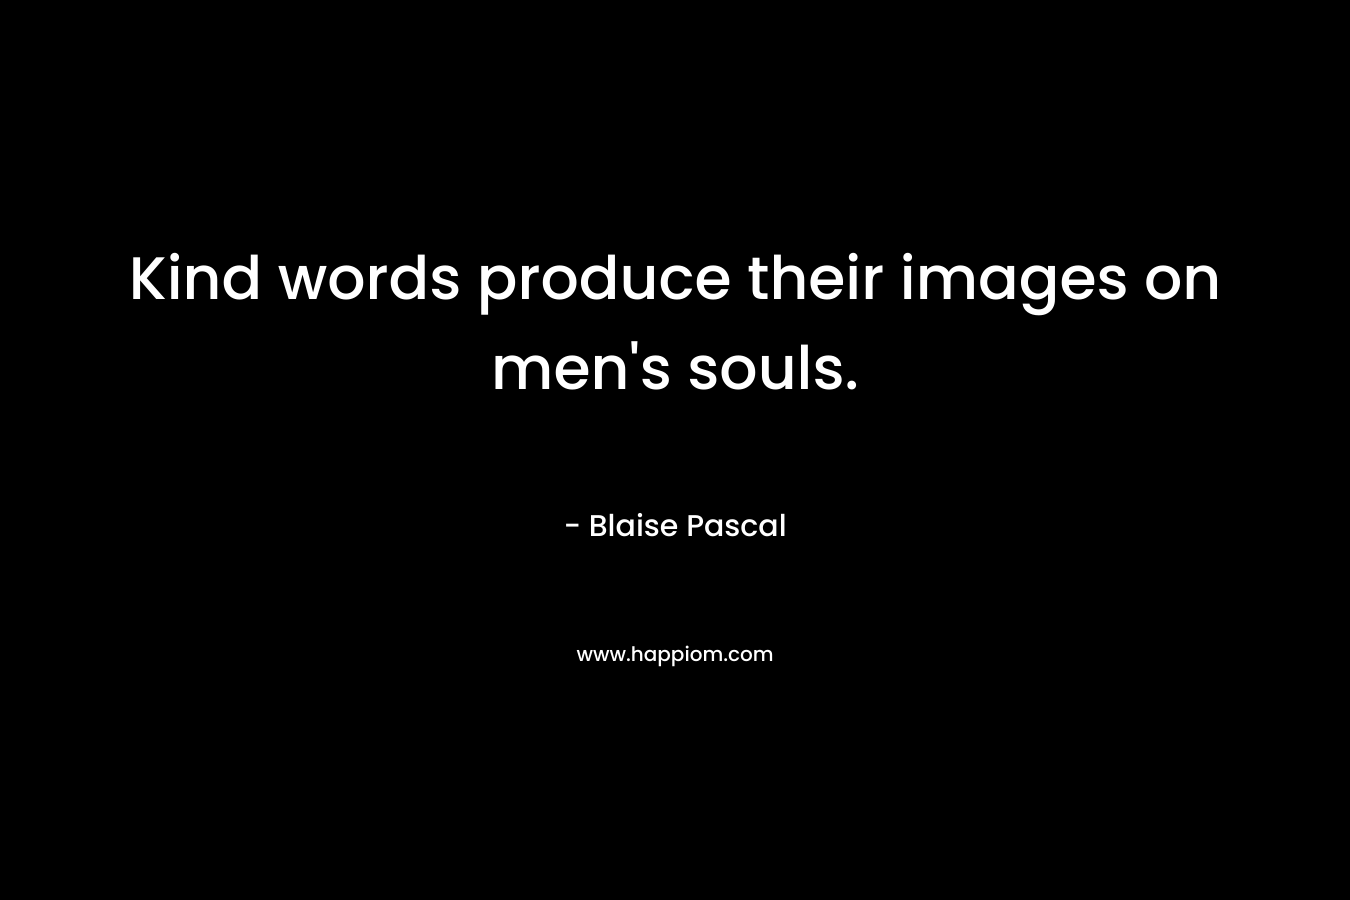 Kind words produce their images on men's souls.